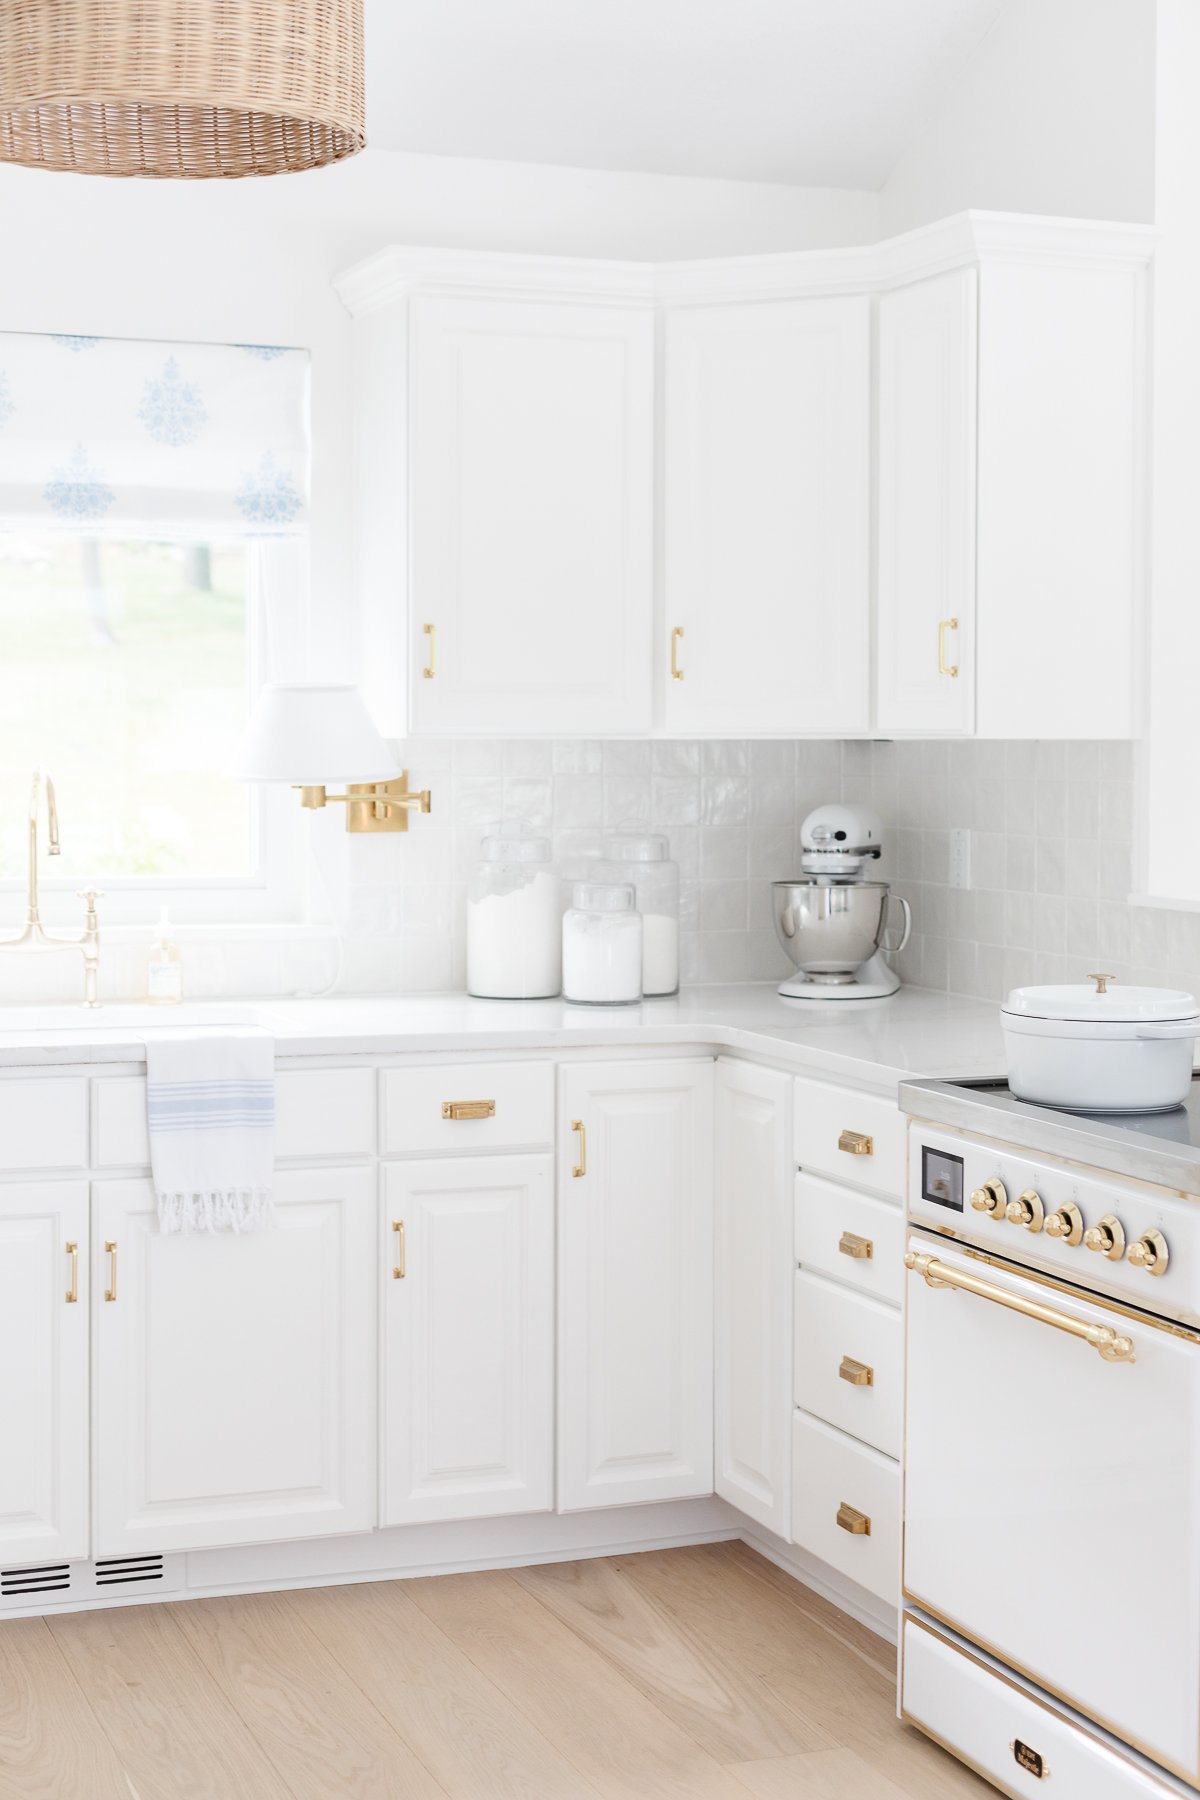 A bright, white modern kitchen with gold hardware, a classic stand mixer, and an Ilve range.